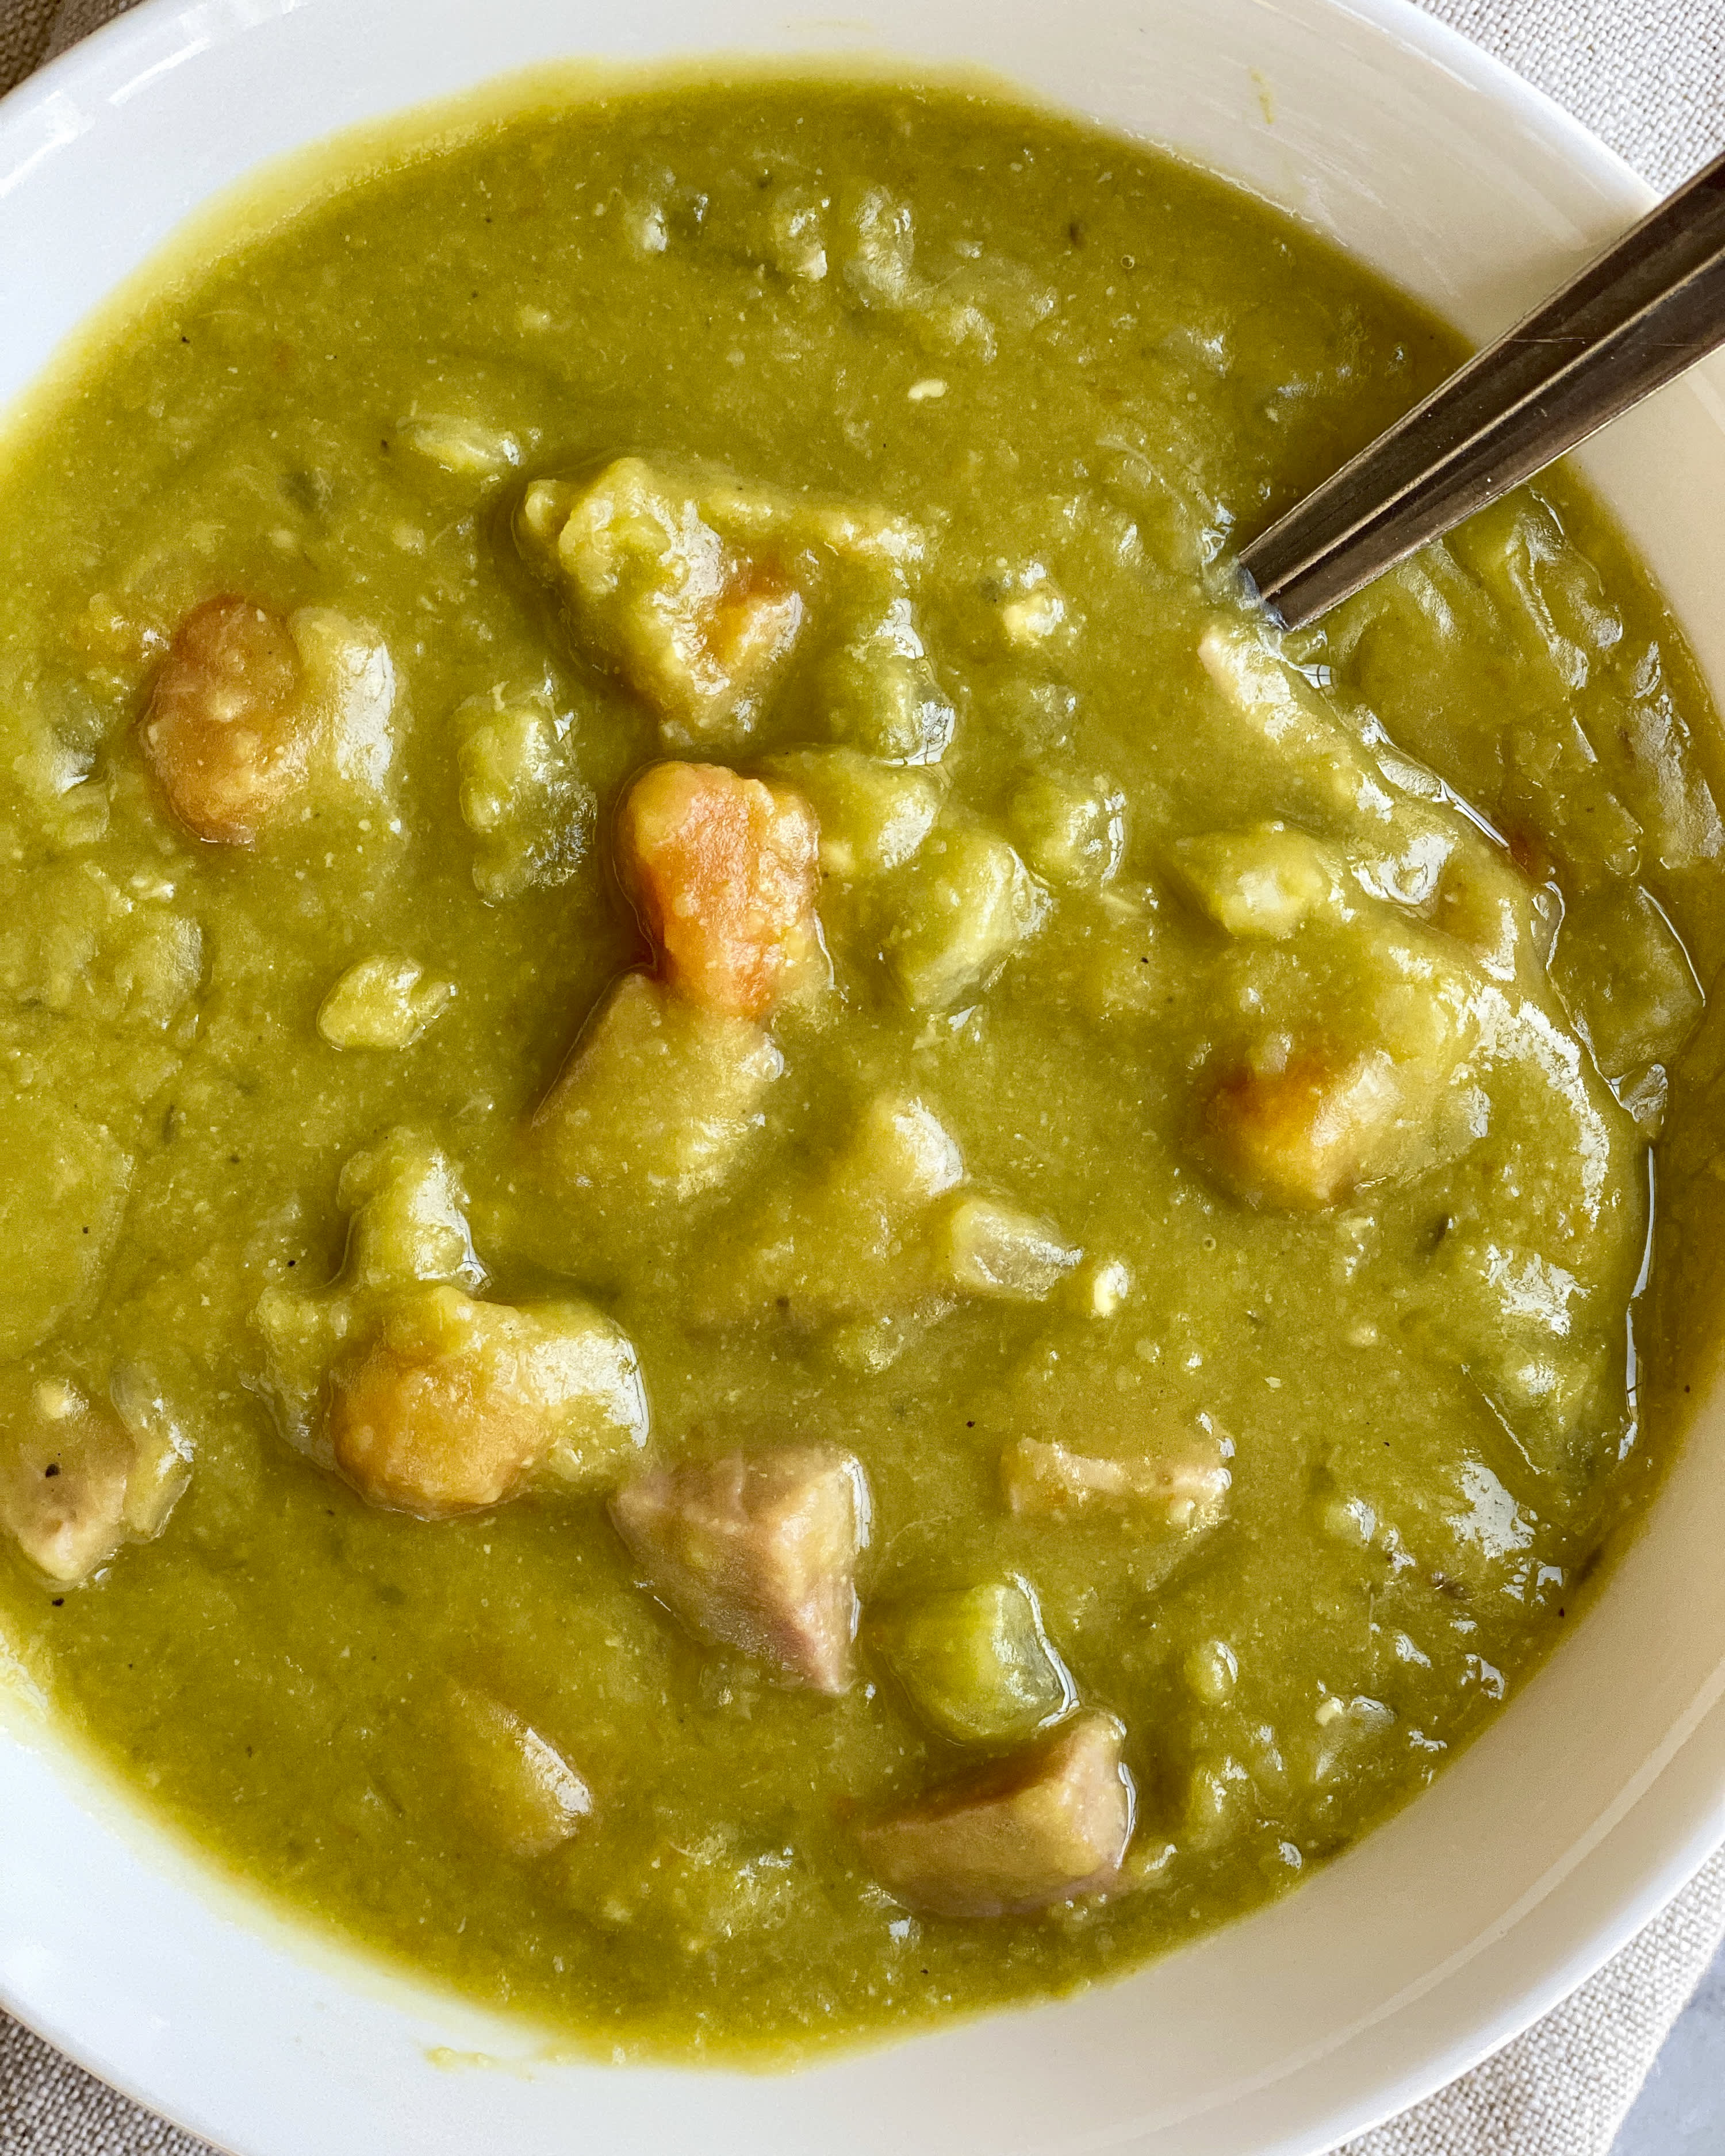 Green Pea Soup - The clever meal